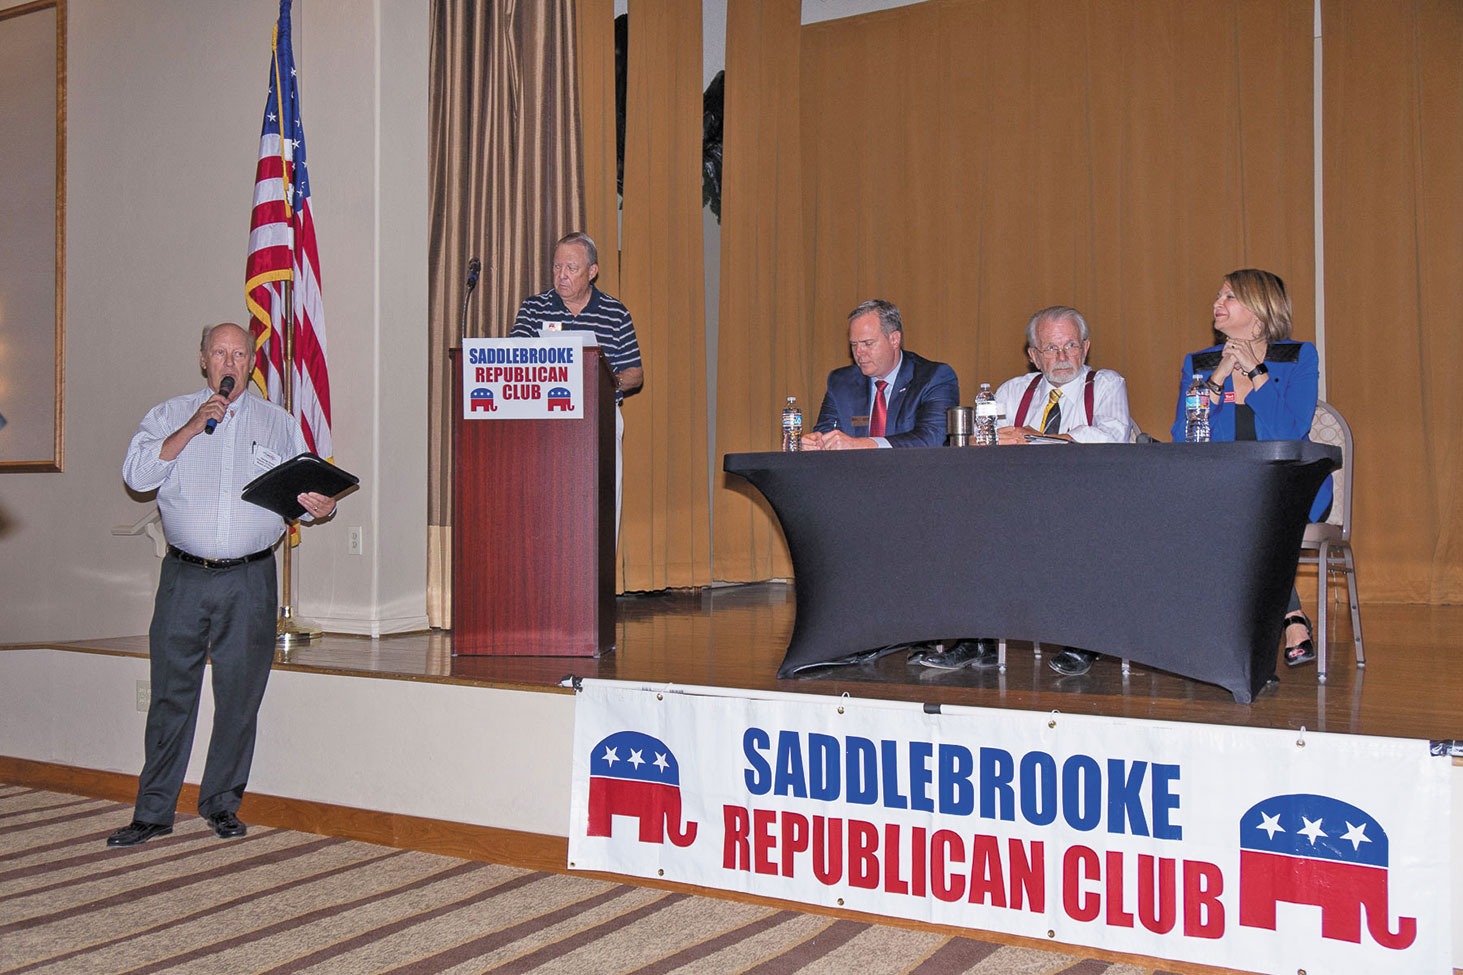 The Senatorial candidates were introduced to the SaddleBrooke Republican Club members.